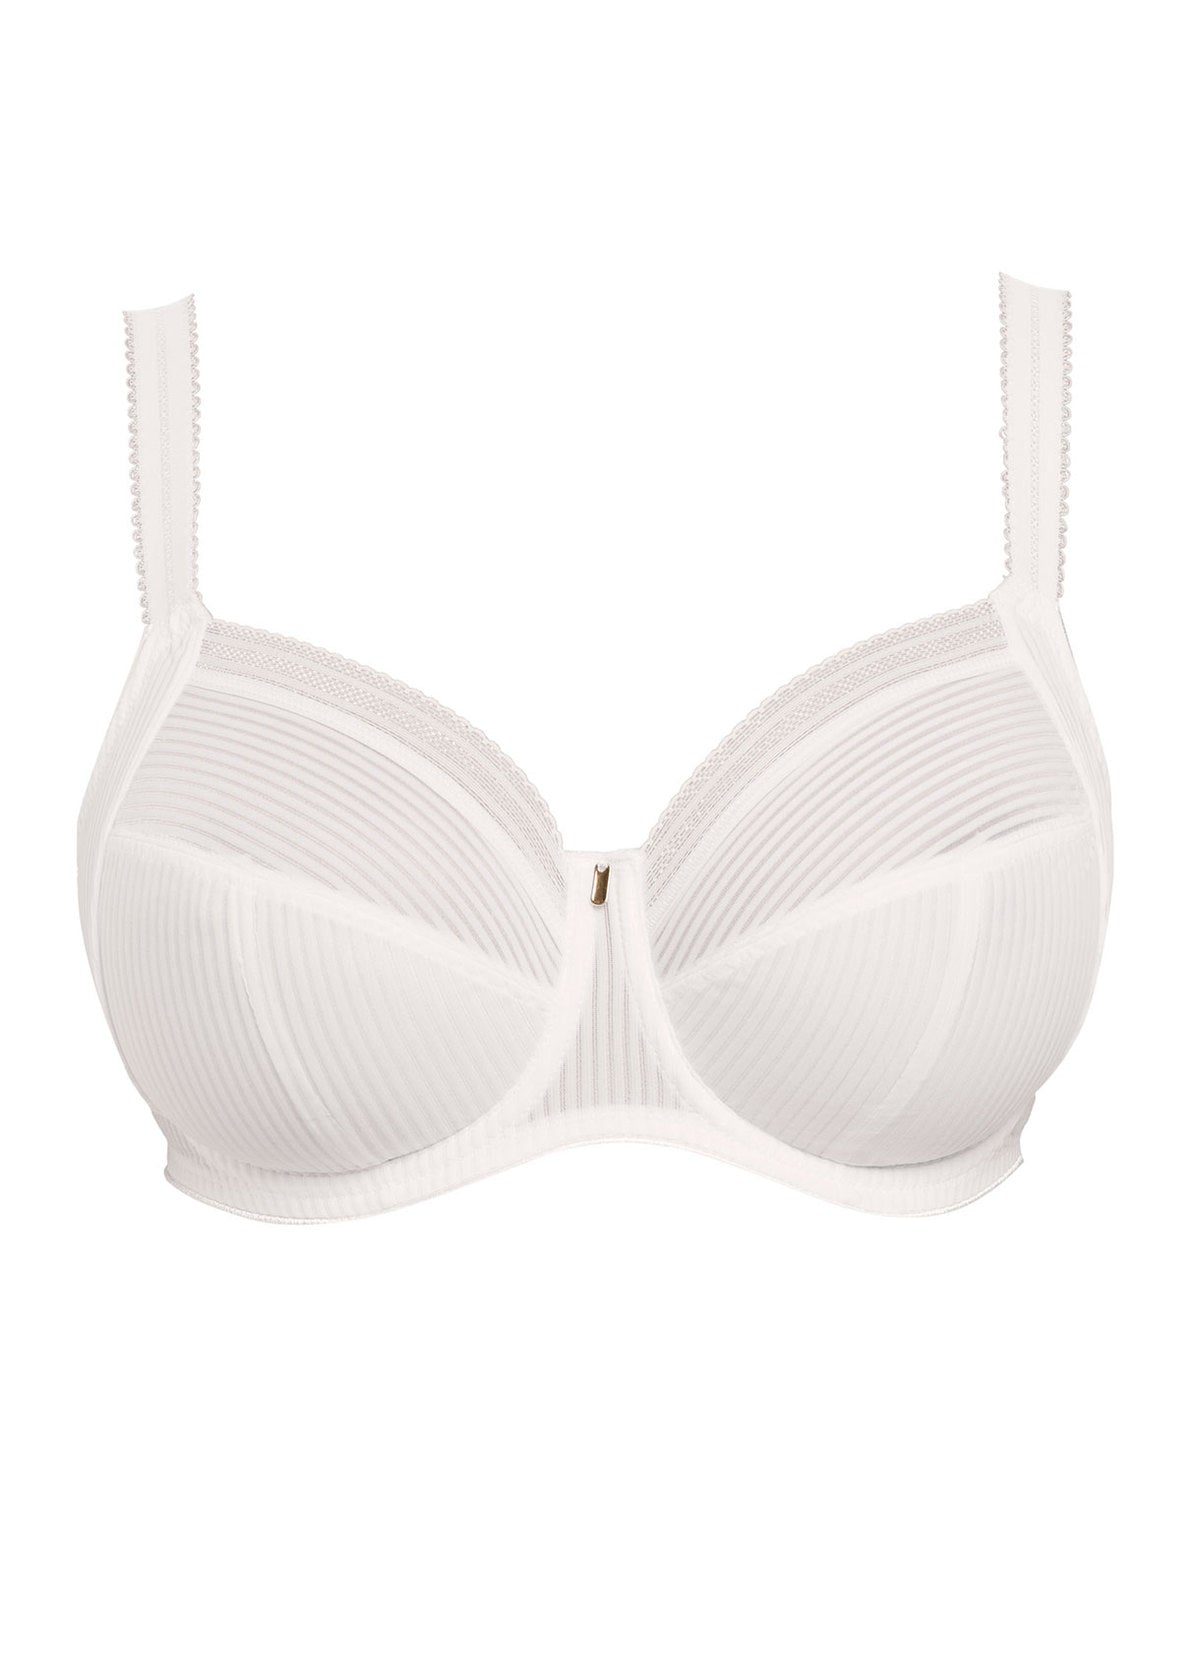 Fantasie Fusion Full Cup Side Support Bra - White 1 Shaws Department Stores